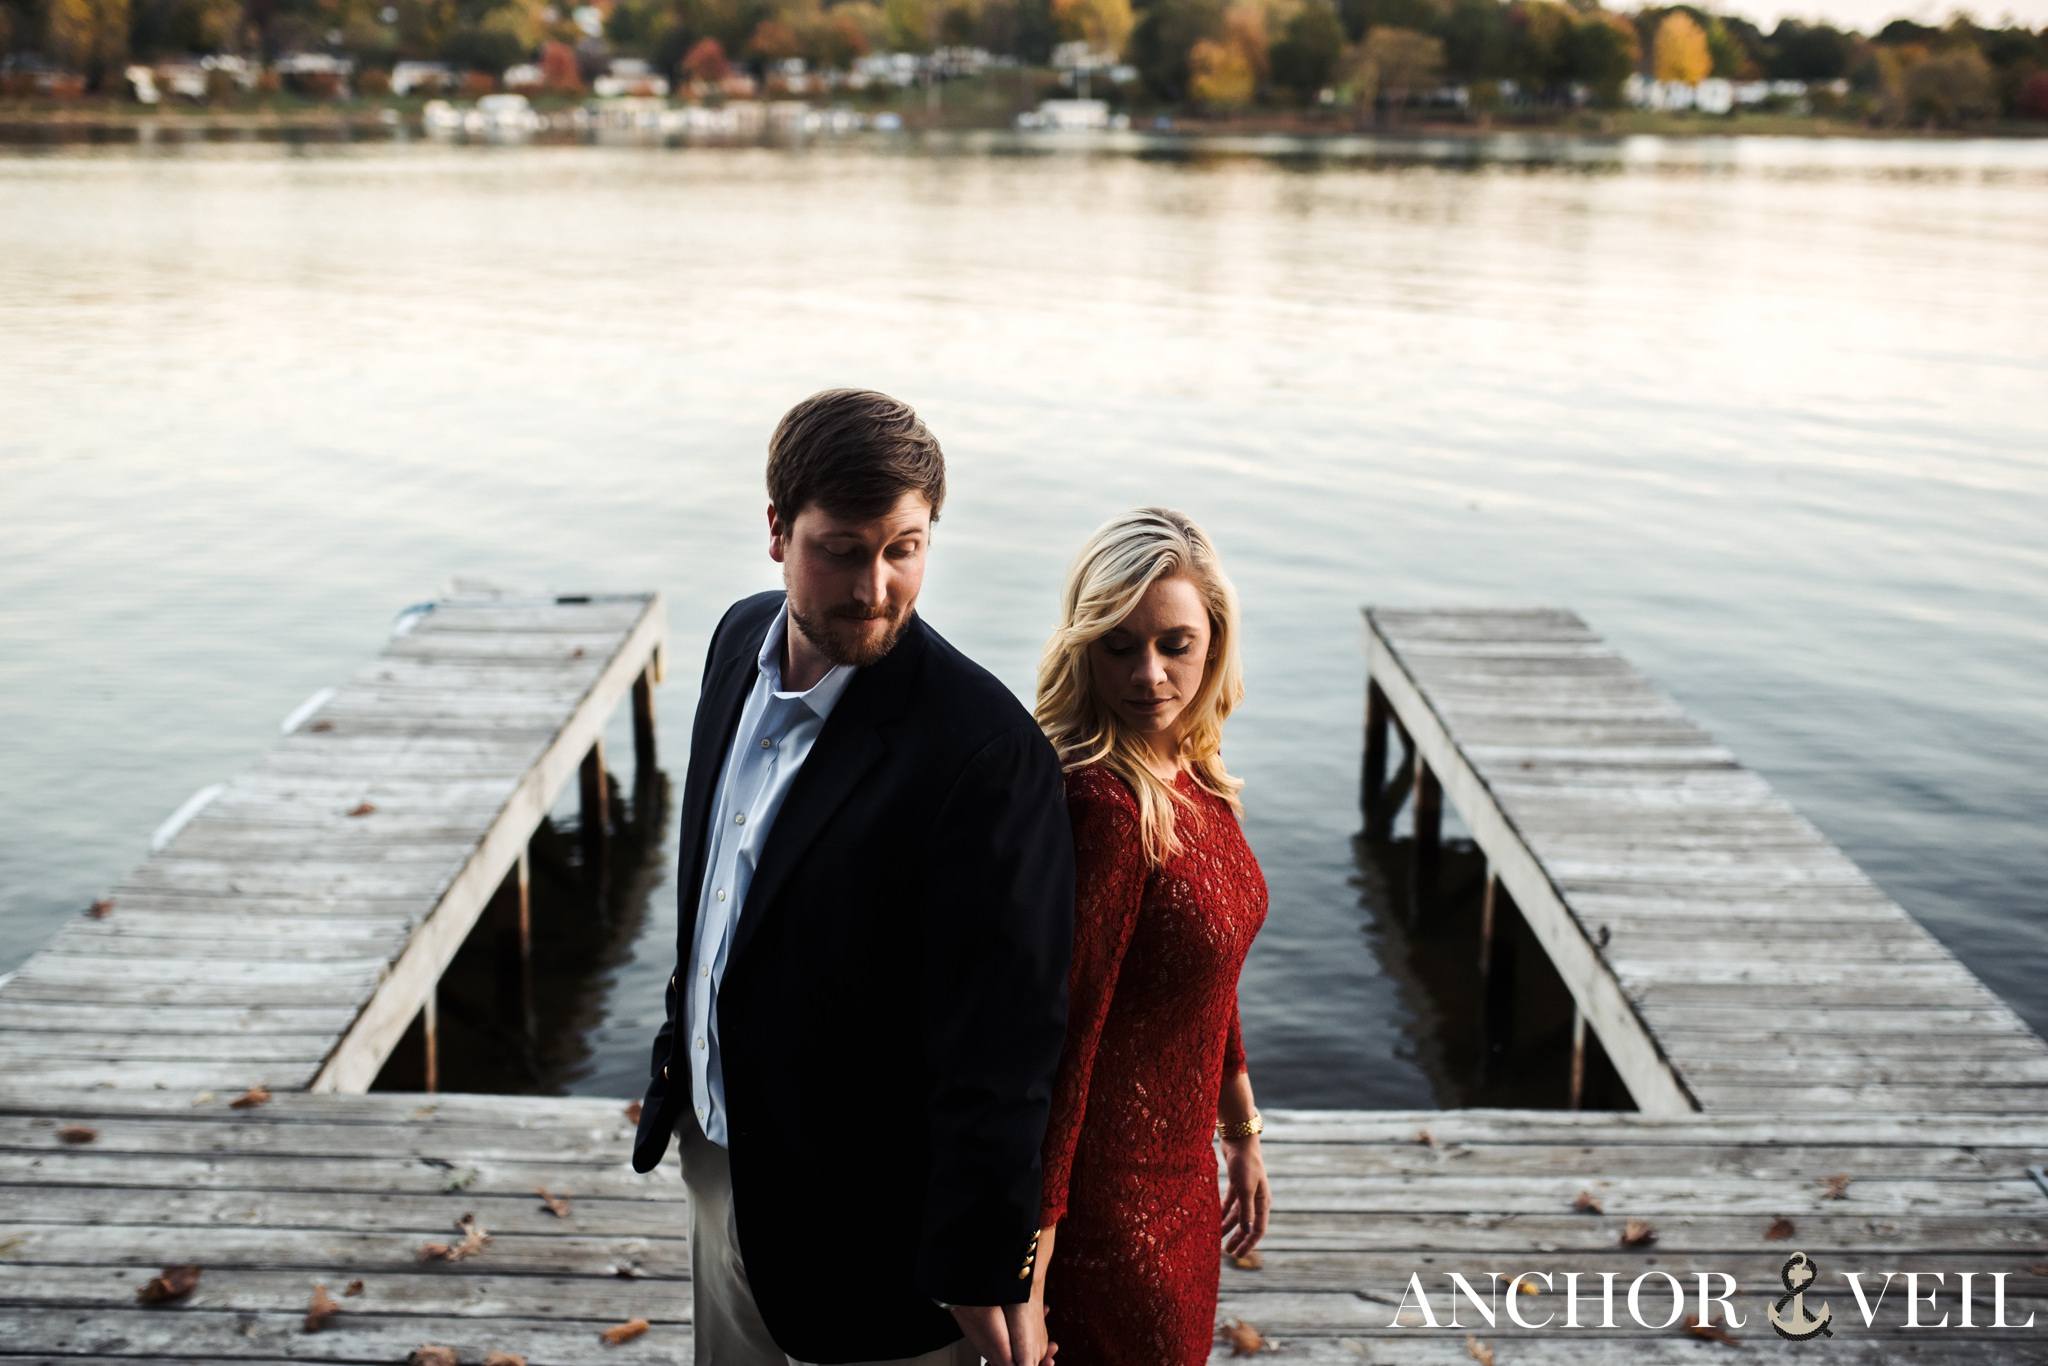 shoulders to shoulders on the dock during the belews lake engagement session